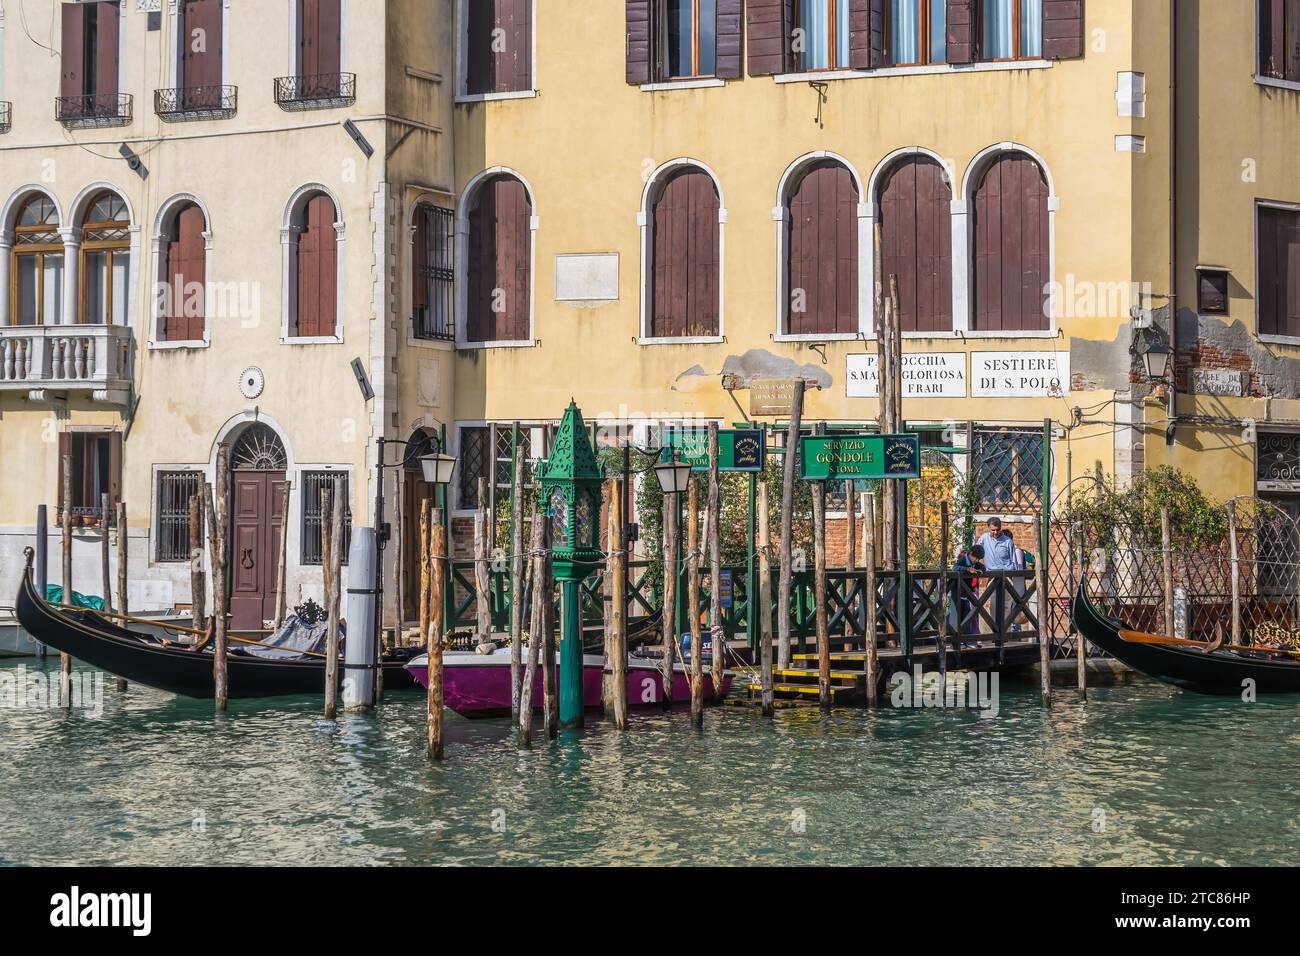 VENICE, ITALY, OCTOBER 12 : People waiting at a Gondola station in Venice on October 12, 2014. Three unidentified people Stock Photo